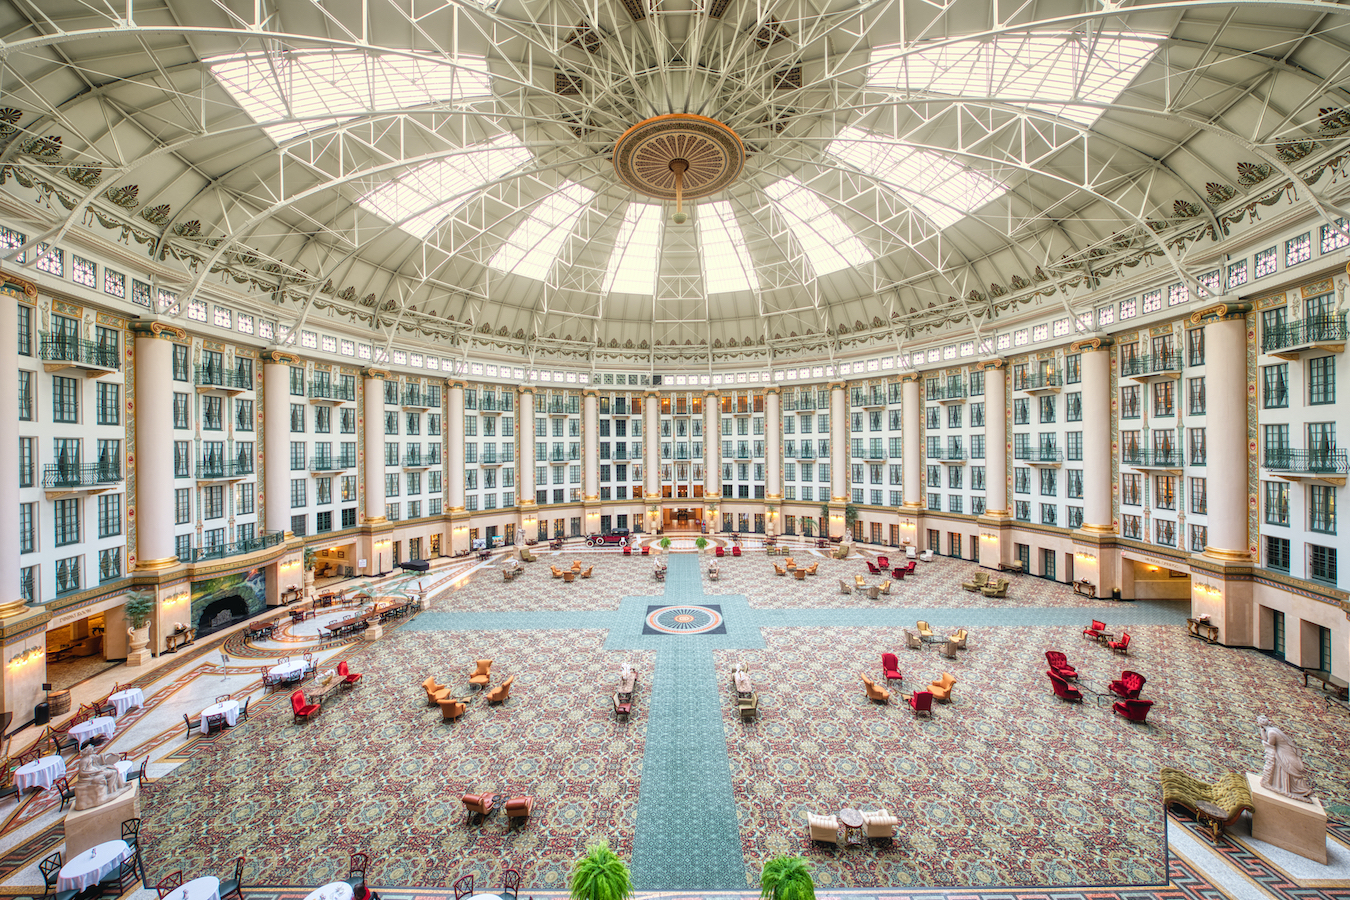 The dome of the West Baden Springs Hotel is 160 feet high and 200 feet in diameter. | Courtesy photo